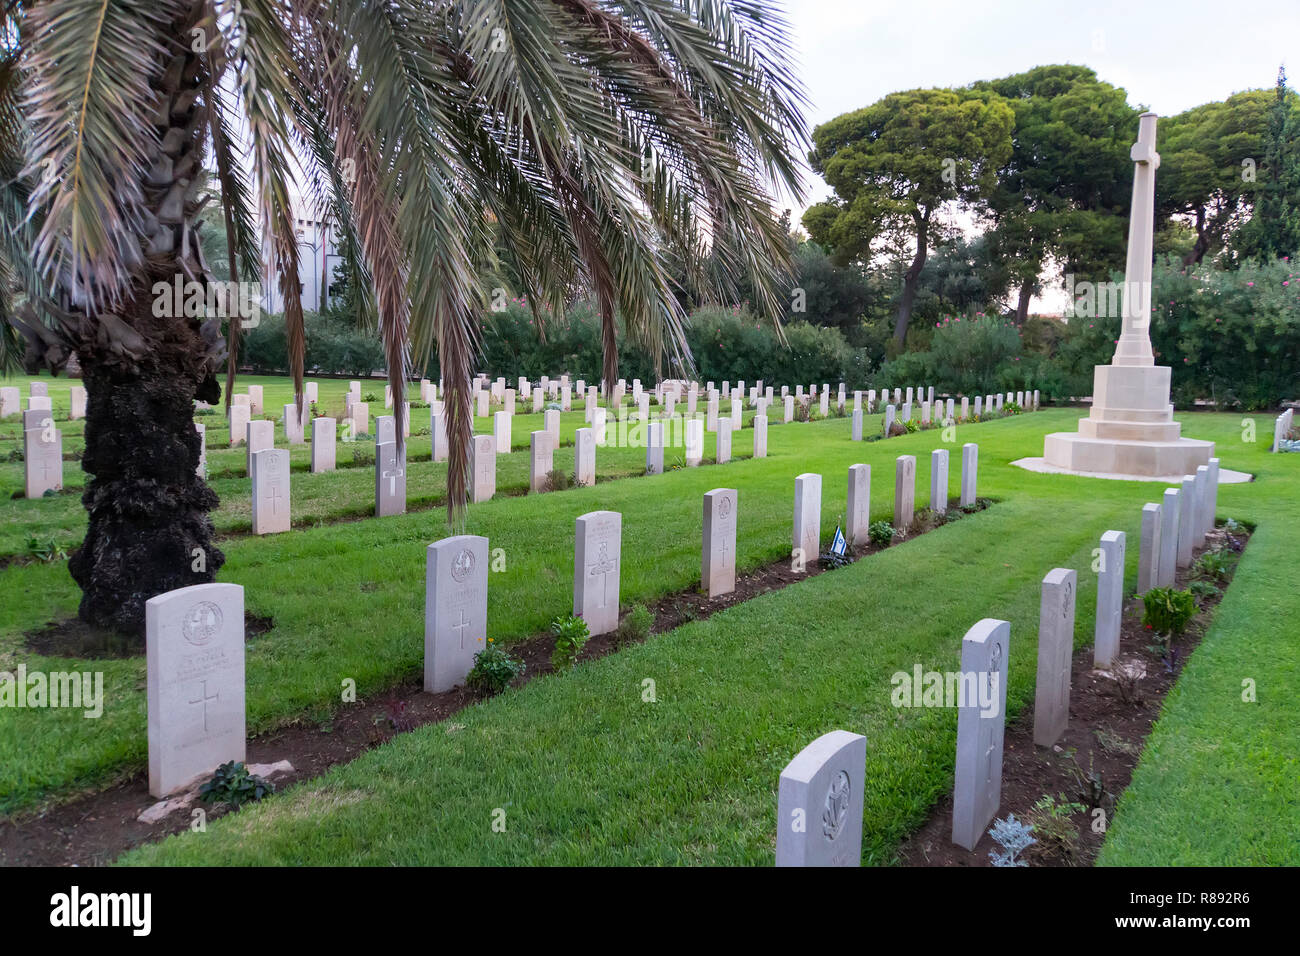 HAIFA, ISRAEL - 21 October 2018: Graveyard for British soldiers who died during the British mandate 1918-1948 , in downtown Haifa, Israel Stock Photo